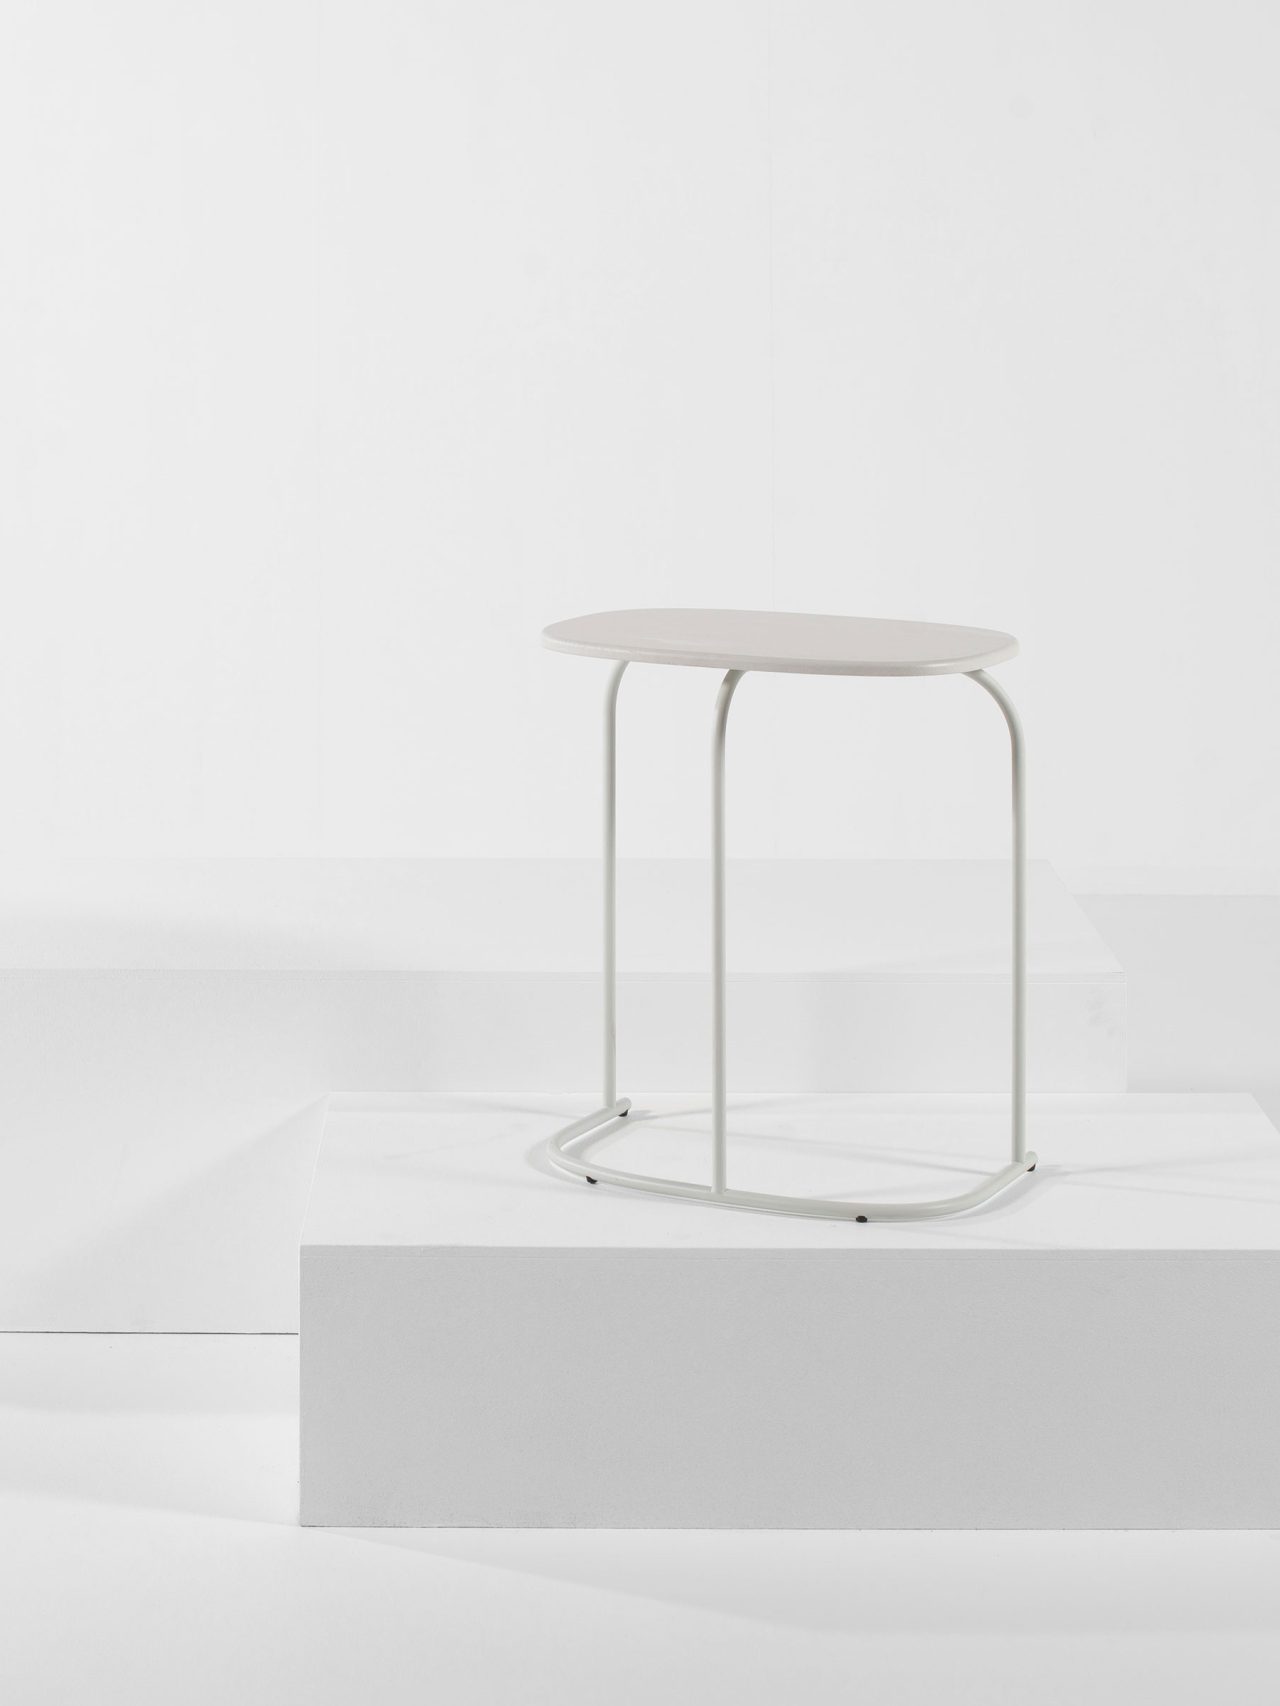 Productive_side_tables_2_2400x3200